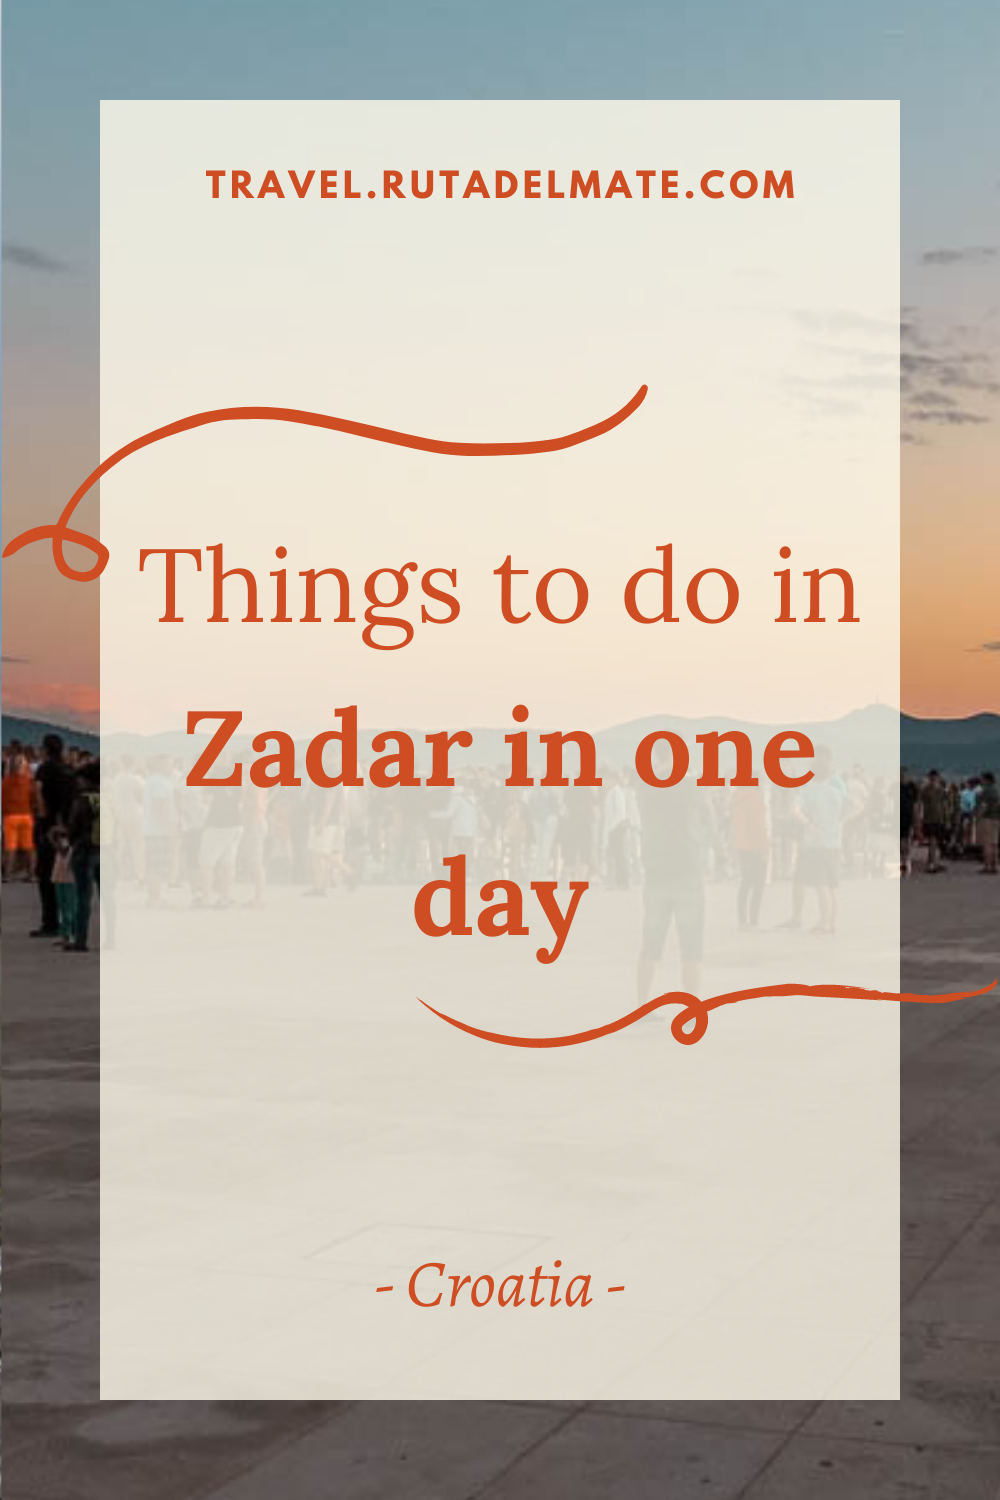 Things to do in Zadar in one day